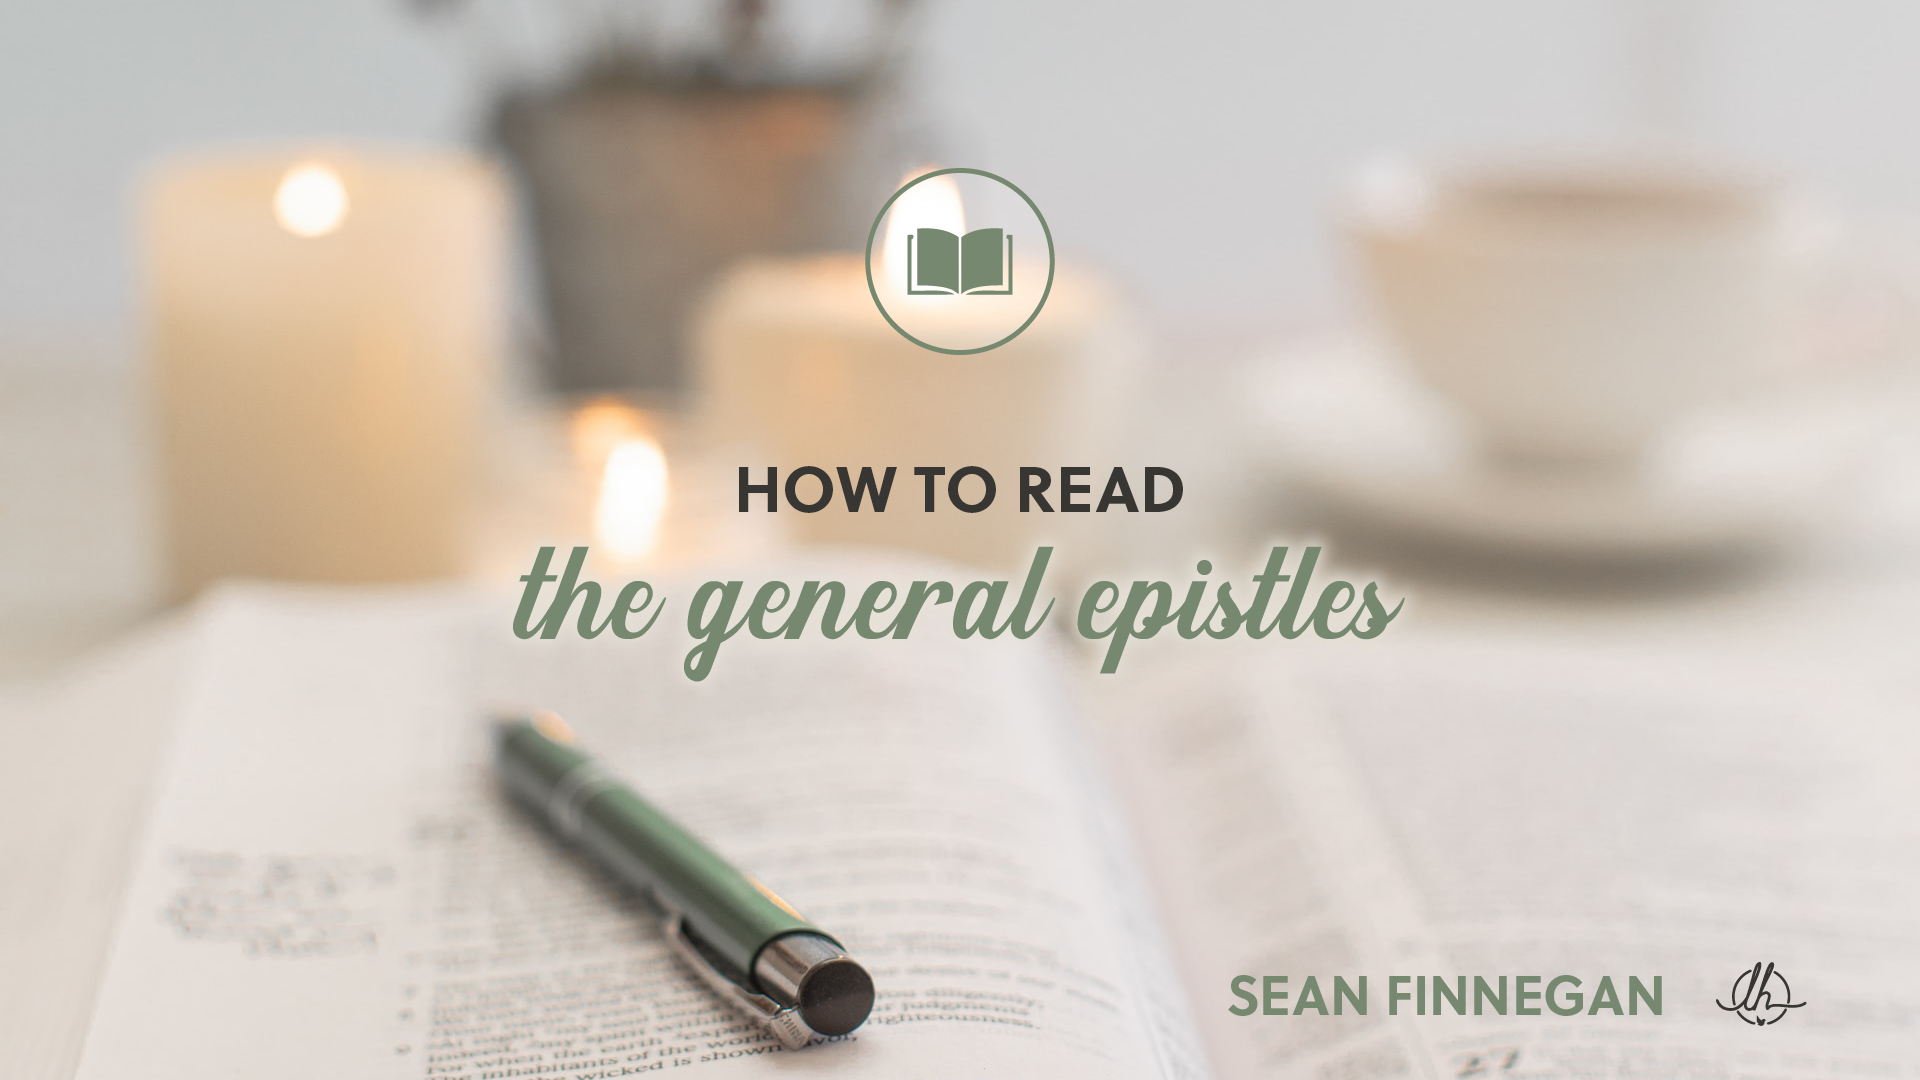 548 Read the Bible for Yourself 15: How to Read the General Epistles